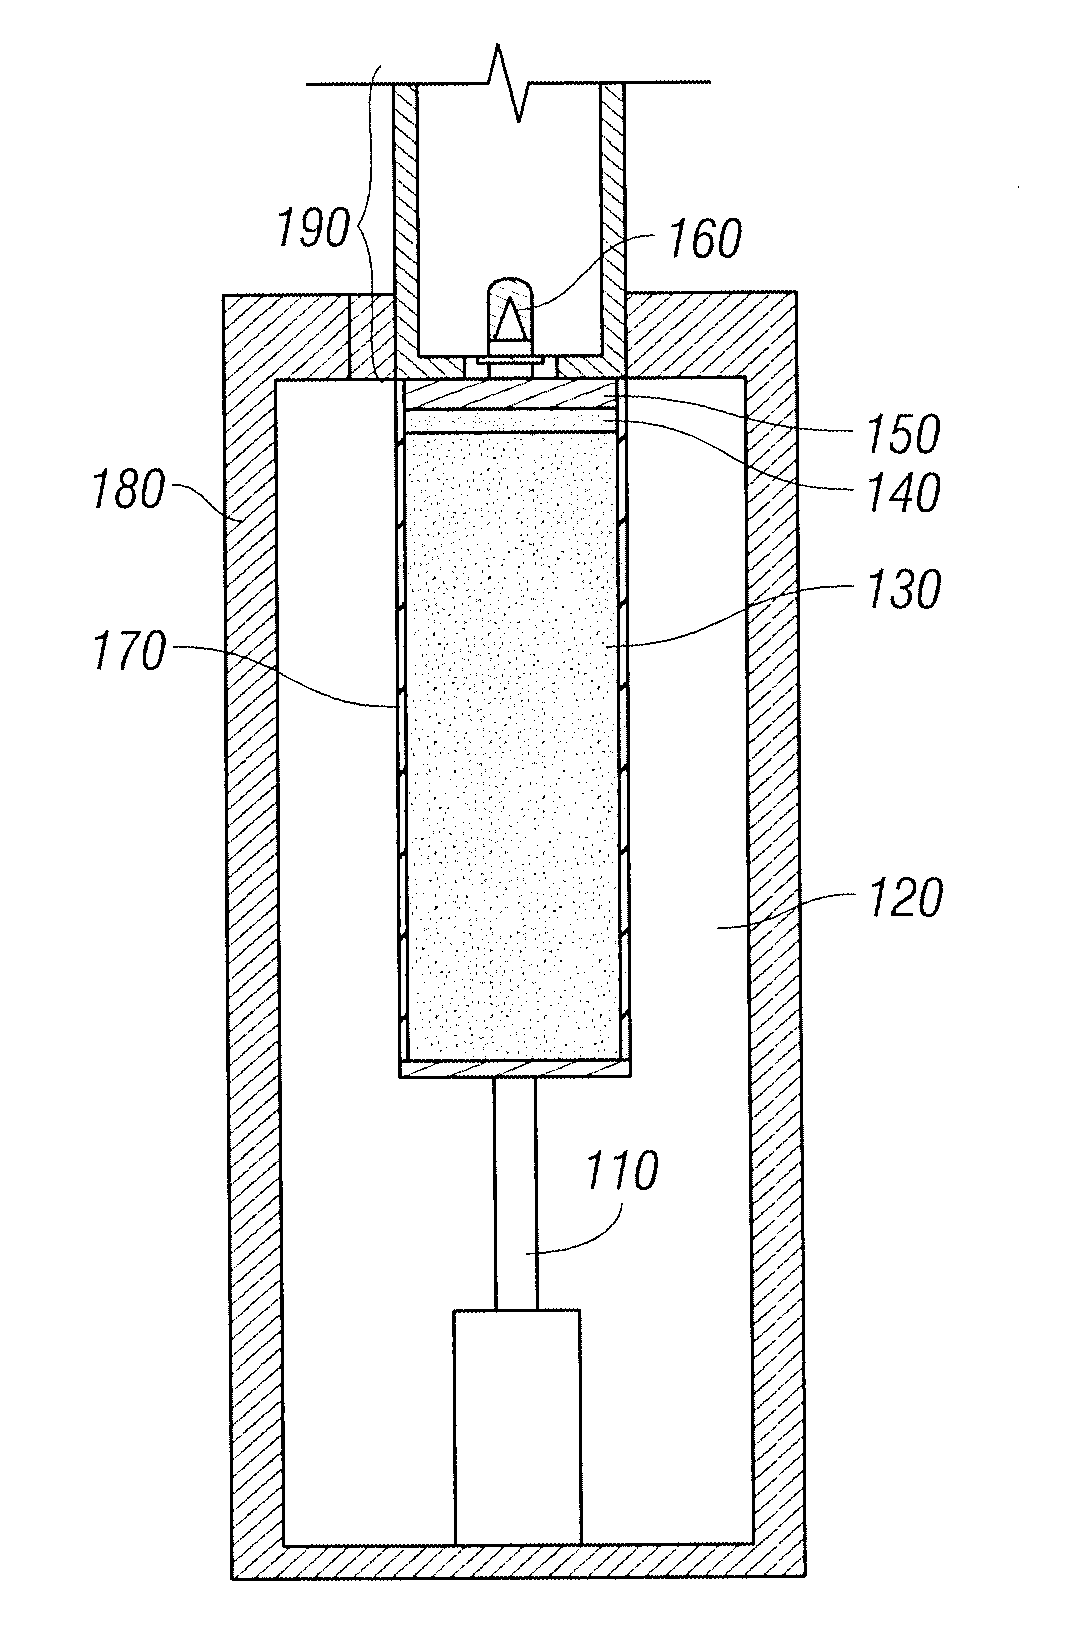 Method for the development and quality control of flow-optimized shaped charges